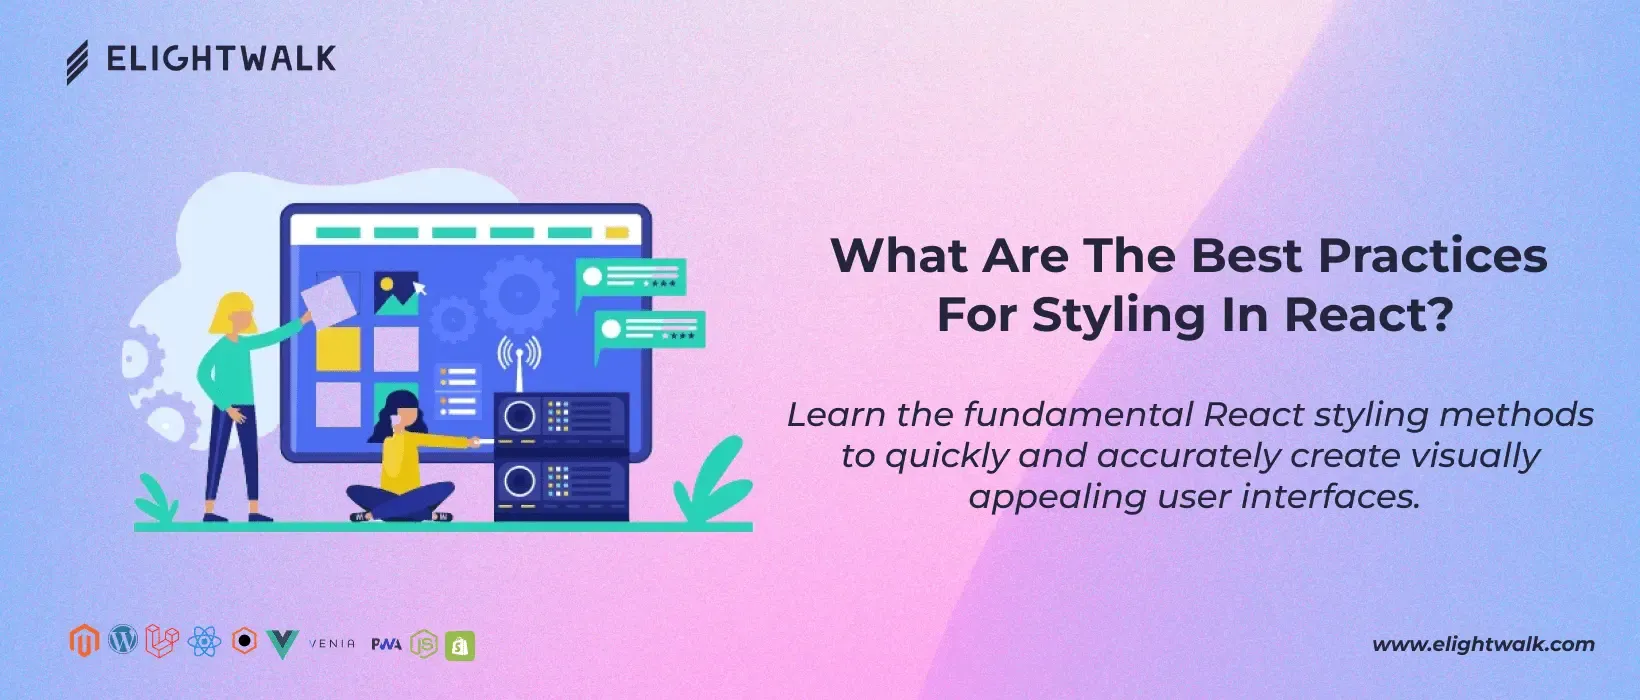 Best practices for styling in react